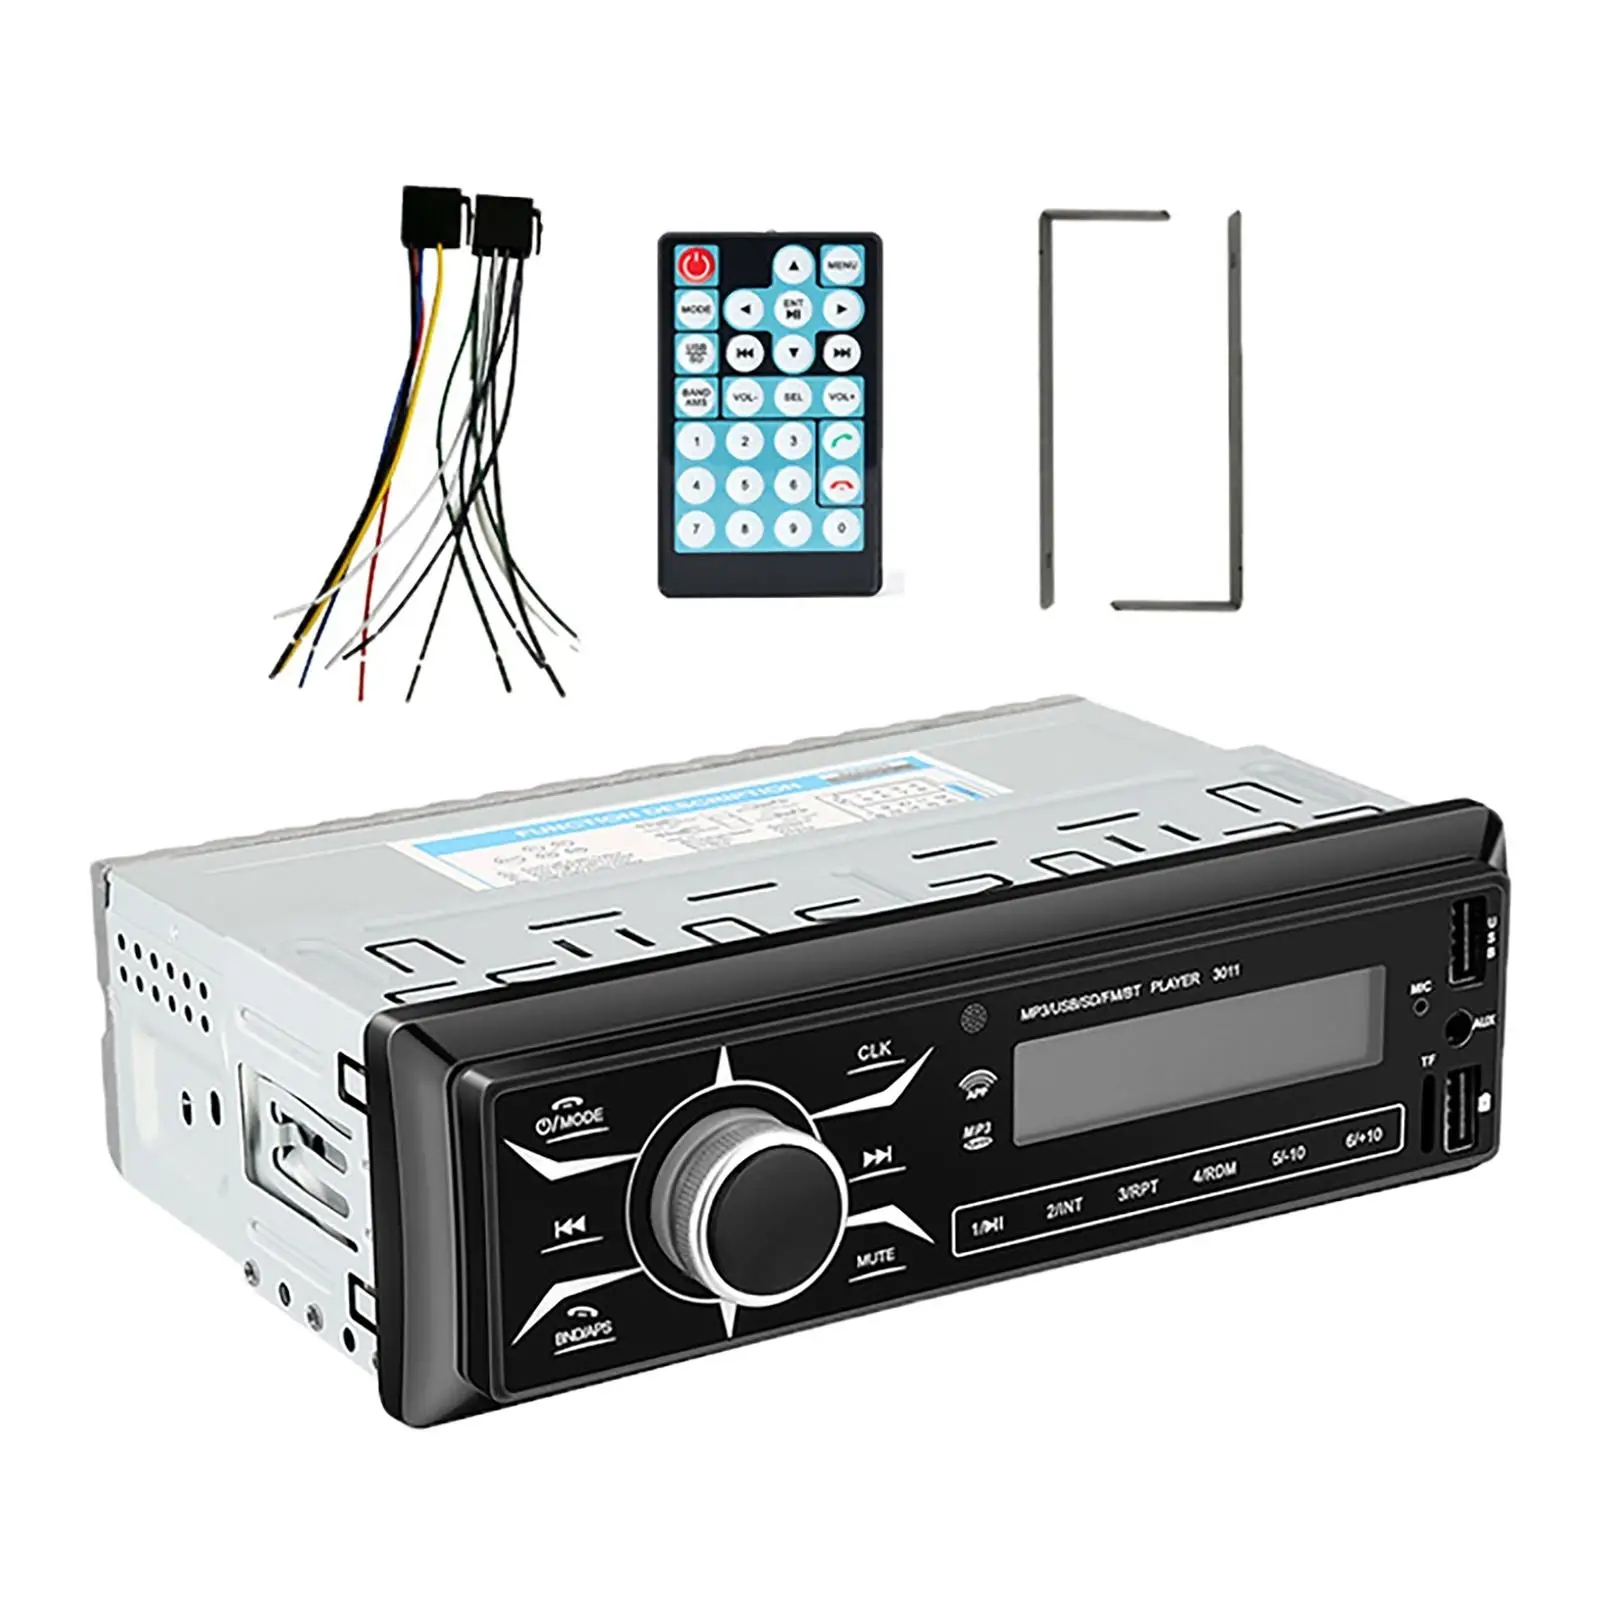 Bluetooth 4.0 Car MP3 Player 24V FM Radio Hands-Free Calling Audio Stereo Voice Assistant Music for Vehicles Cars